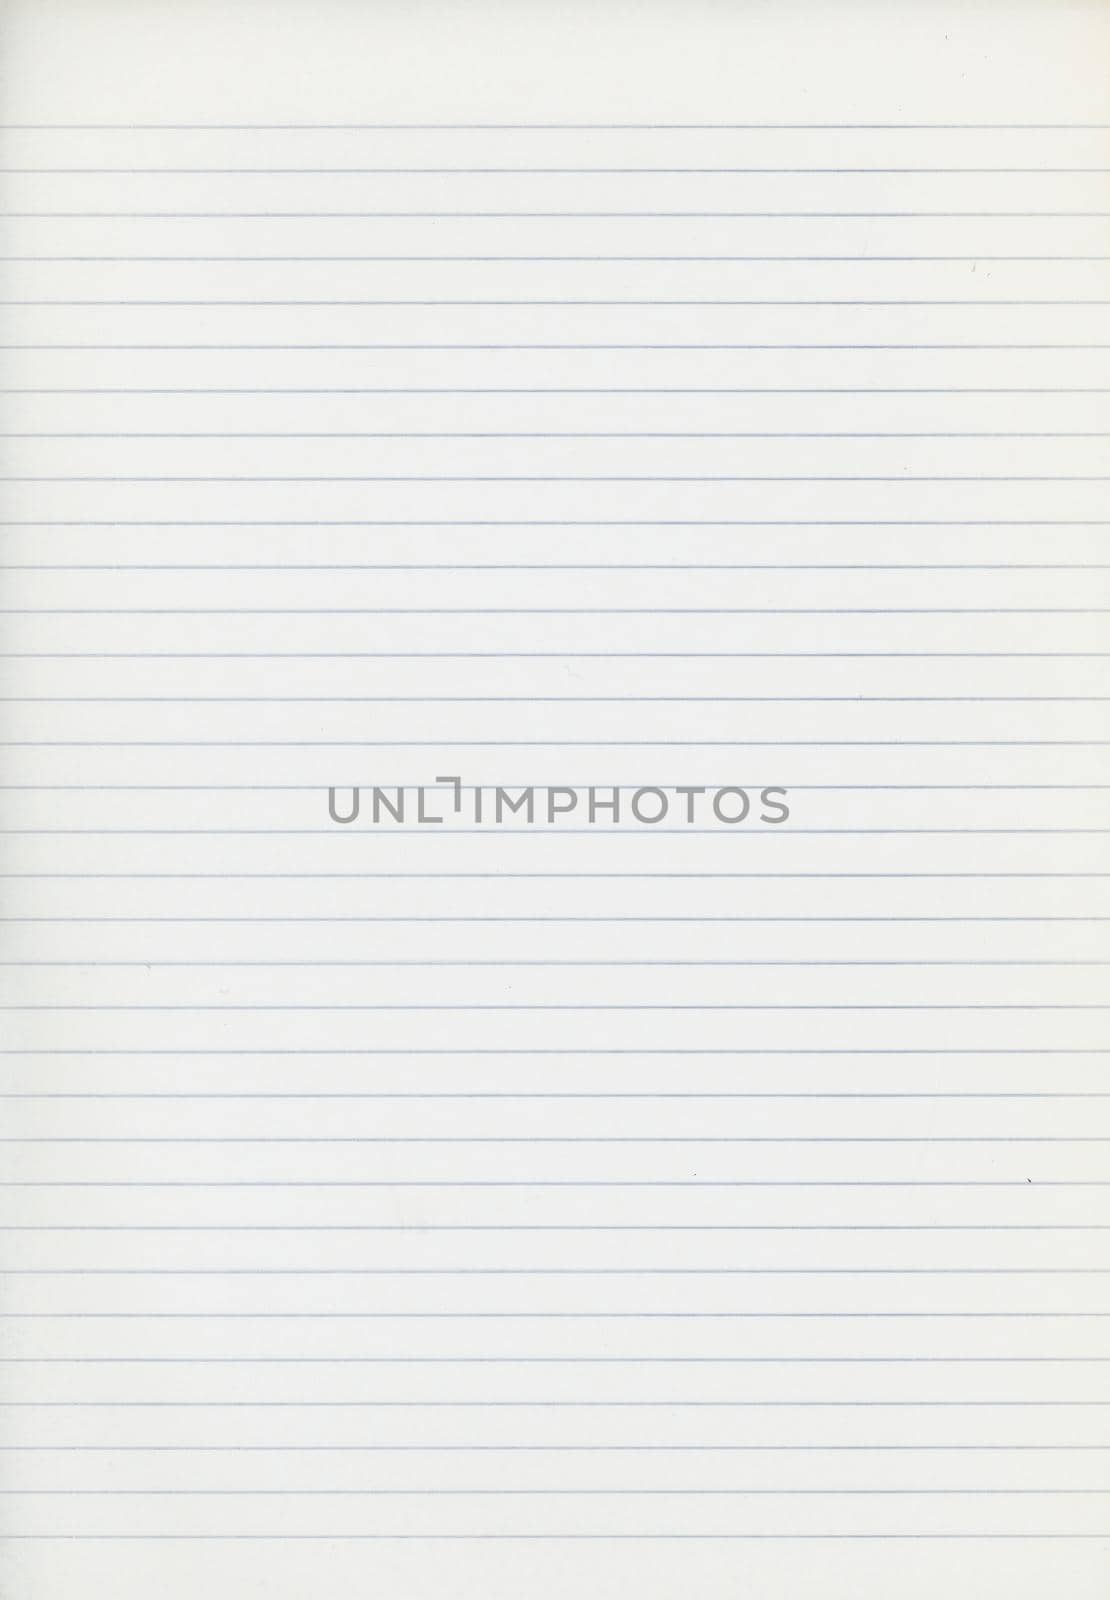 ruled paper texture useful as a background